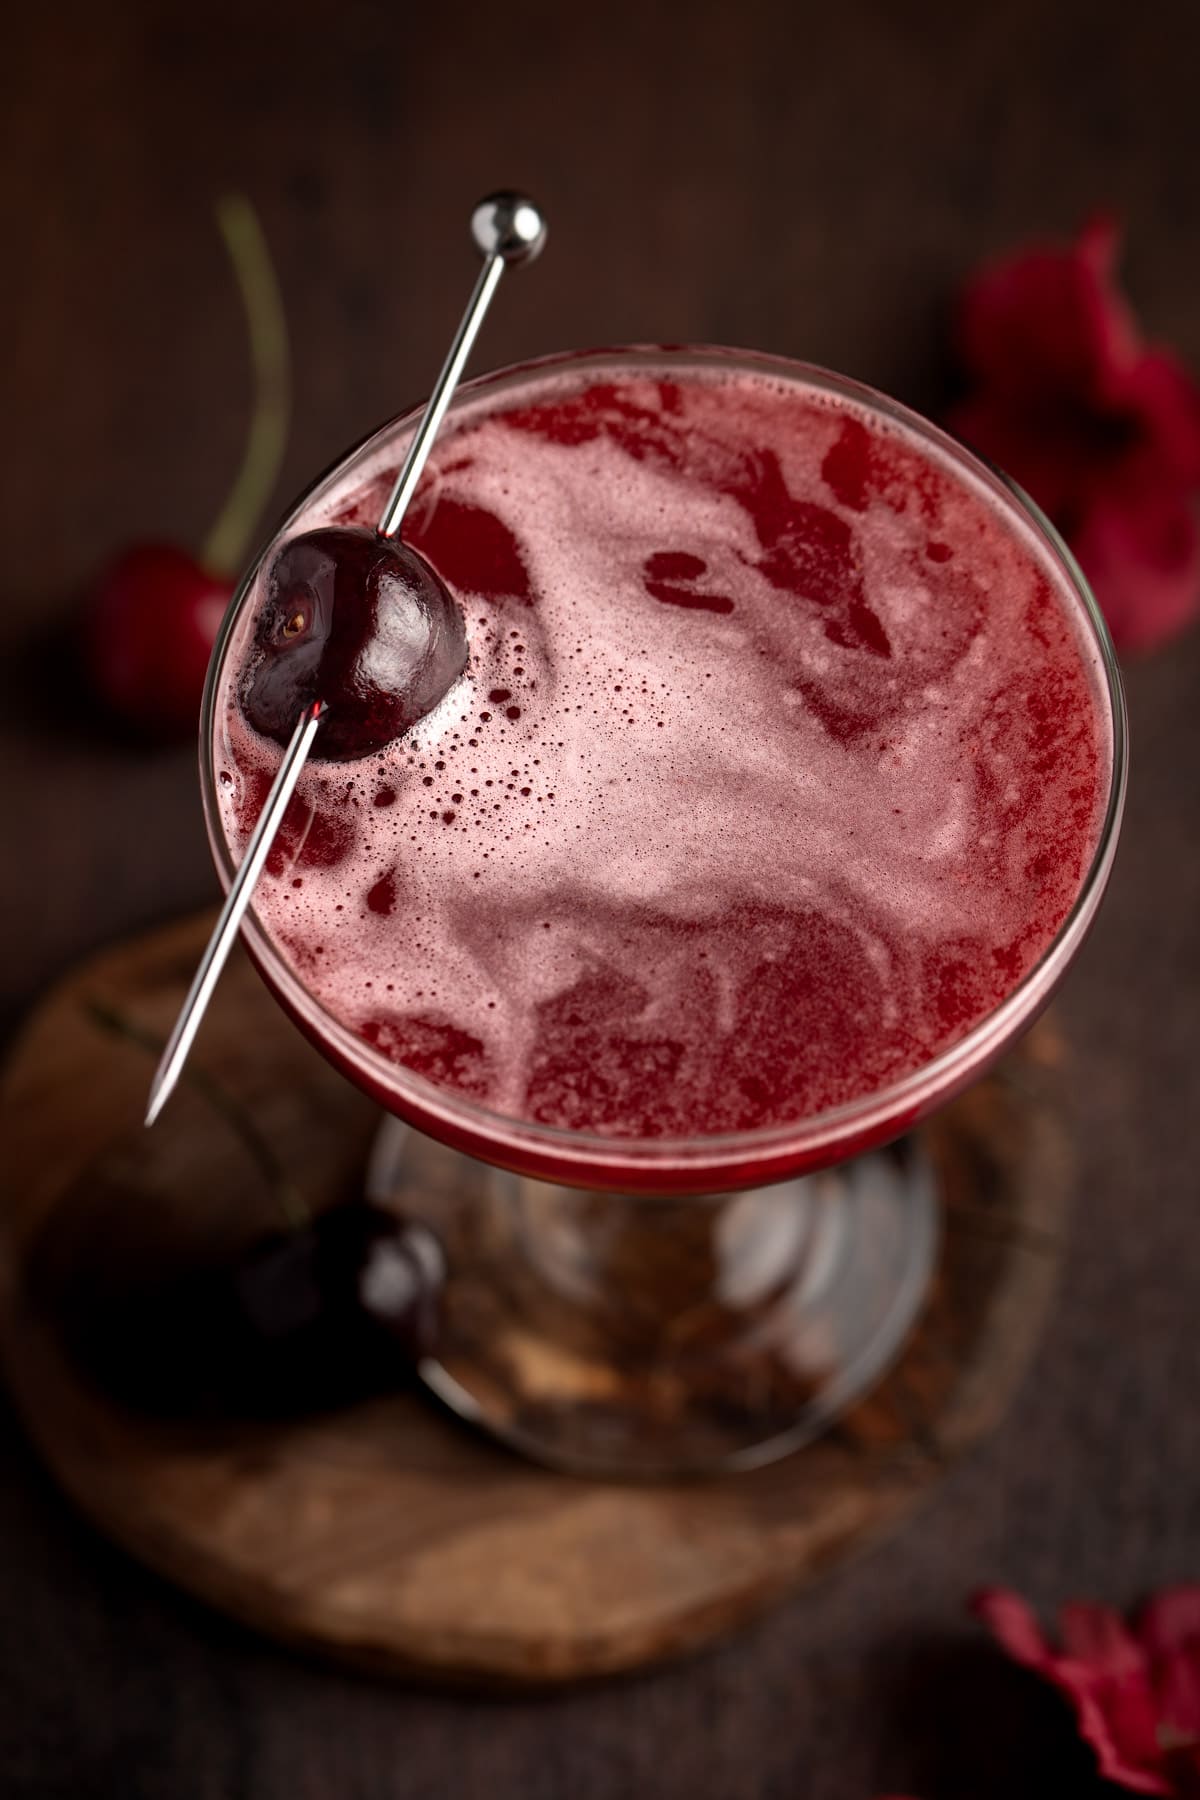 Overhead view of a red bourbon cherry cocktail on a wooden table.